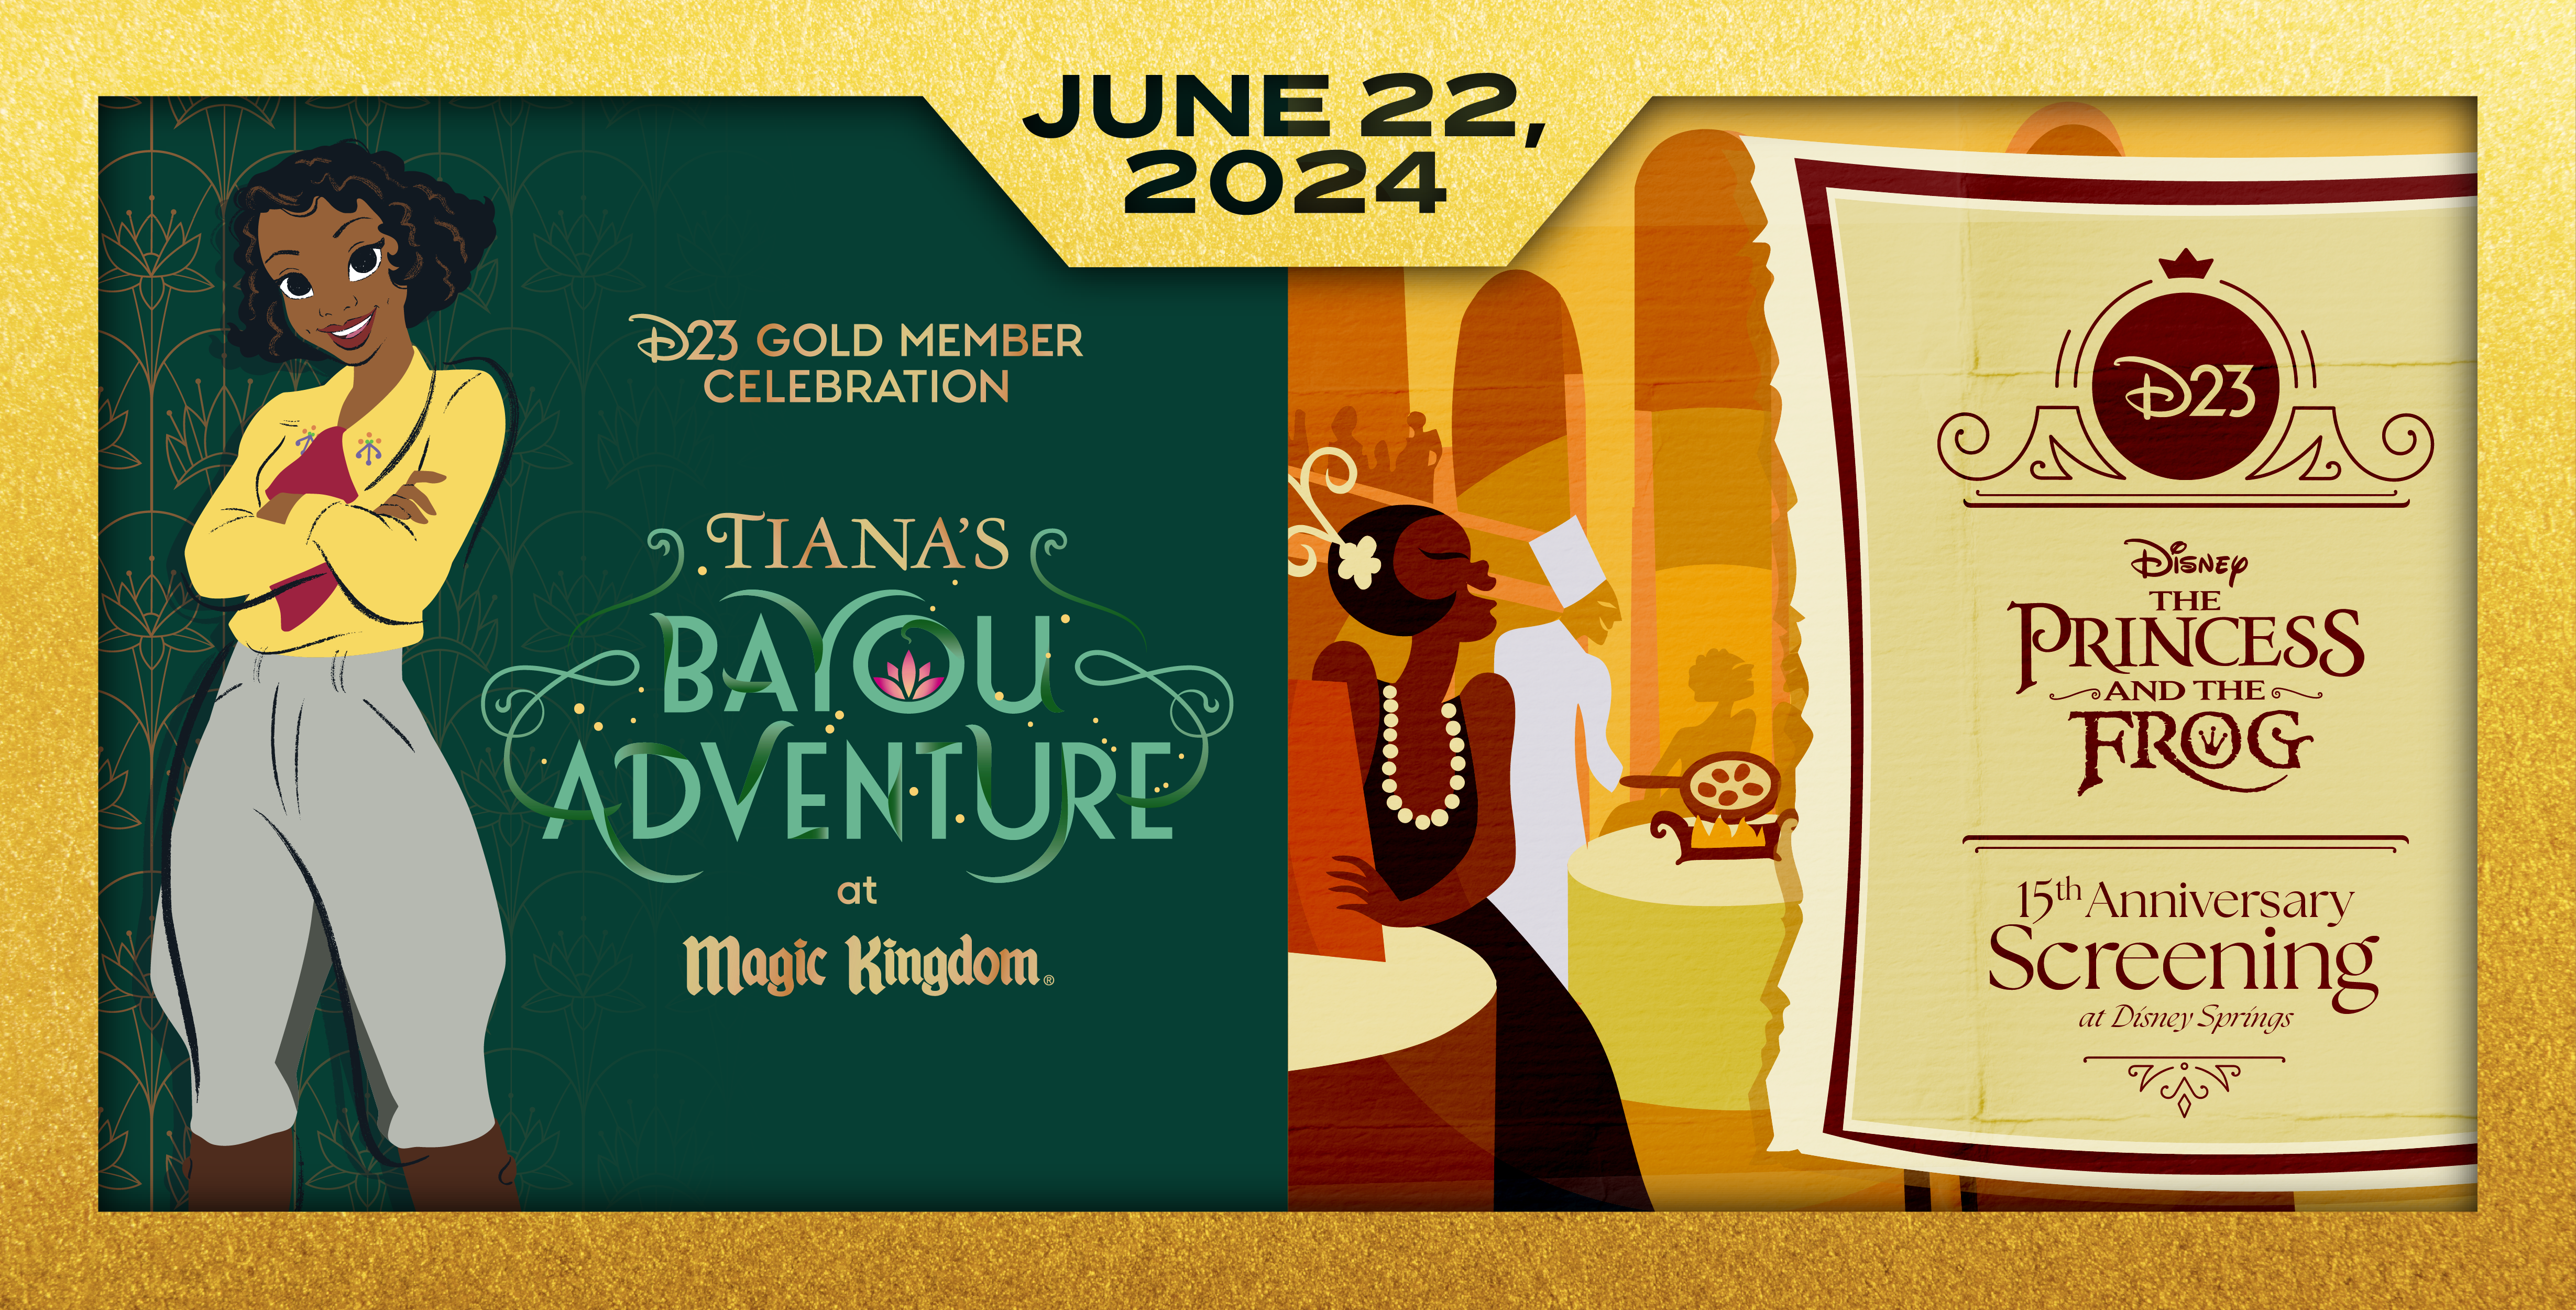 Triptych image of two D23 Event Graphics listed side by side. The graphic on the right is an illustration of Tiana’s Palace in the orange and gold style of the “Almost There” sequence in the film: Patrons and restaurant employees are enjoying dinner, all with big smiles: A chef cooking eggs, a waiter holding bottles of wine on a tray, and two guests sitting at tables, one with a menu. There is an invitation to the right side depicting the event name “D23. Disney. The Princess and the Frog ‑15th Anniversary Screening at Disney Springs.” The graphic on the left is depicting event name in gold and shades of green: “D23 Gold Member Celebration. Tiana’s Bayou Adventure at Magic Kingdom.” Tiana is wearing a yellow blouse, maroon scarf, and green-gray pants, looking straight forward, smiling with her arms casually crossed, standing at left of the image next to the name of the event against a background of gilded art-deco style patterns with gold and plush green. Both images are surrounded by a gilded gold frame with the date of these events “June 22, 2024” listed on top of them.